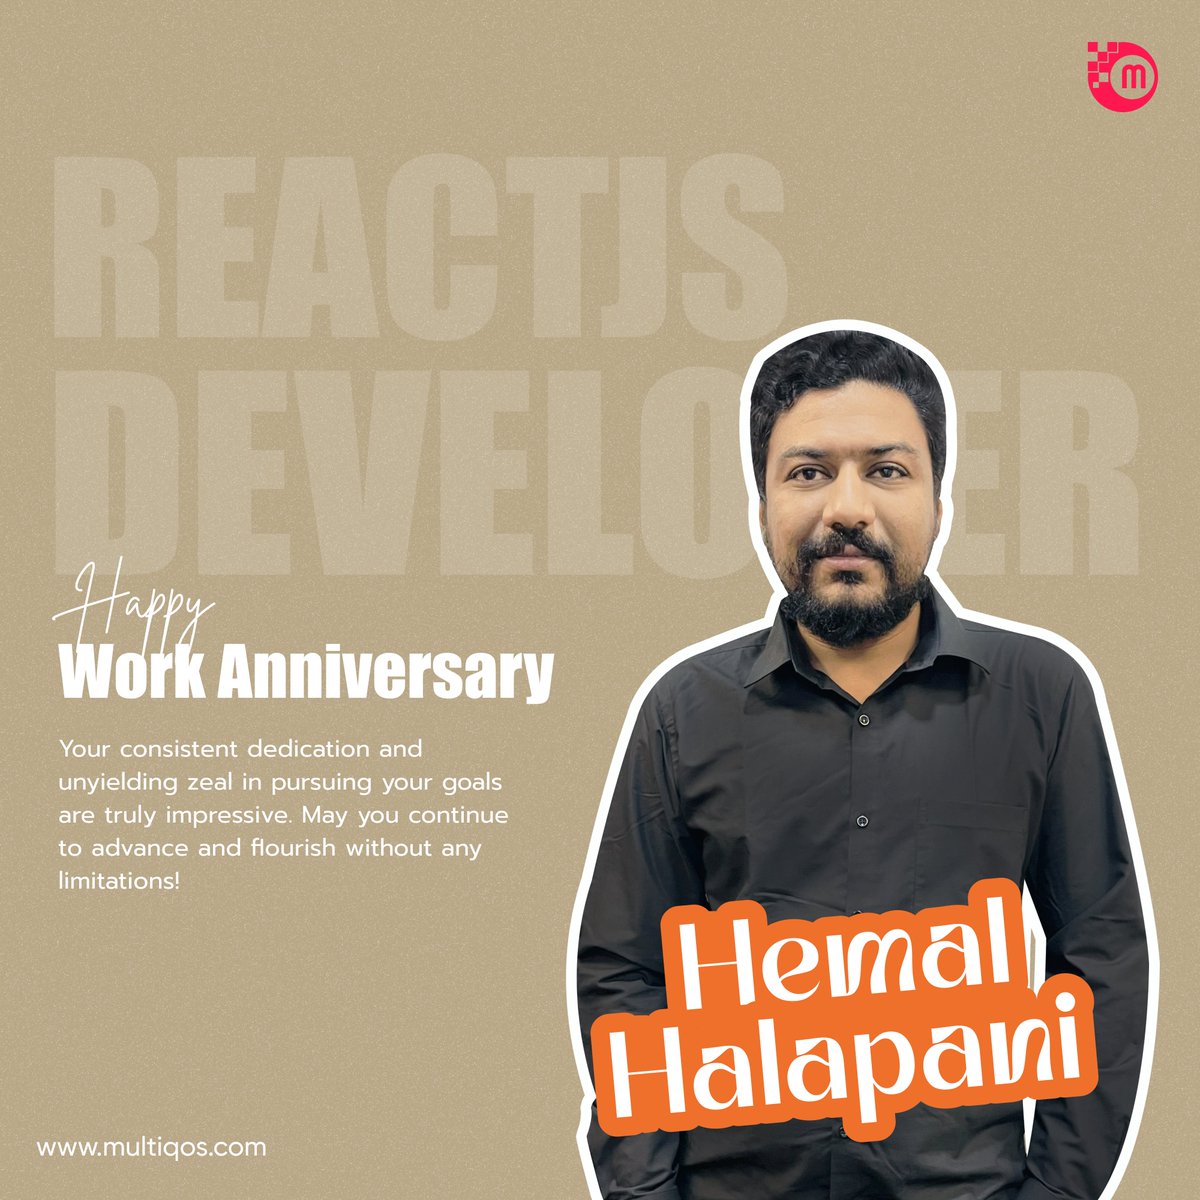 Congratulations, 𝐇𝐞𝐦𝐚𝐥 𝐇𝐚𝐥𝐚𝐩𝐚𝐧𝐢, on your work anniversary! 🎉

Your dedication and contributions to #MultiQoS are truly appreciated.

#workanniversary #milestonemoments #reactjsdeveloper #employeeappreciation #developer #multiqosculture #celebration #congratulations